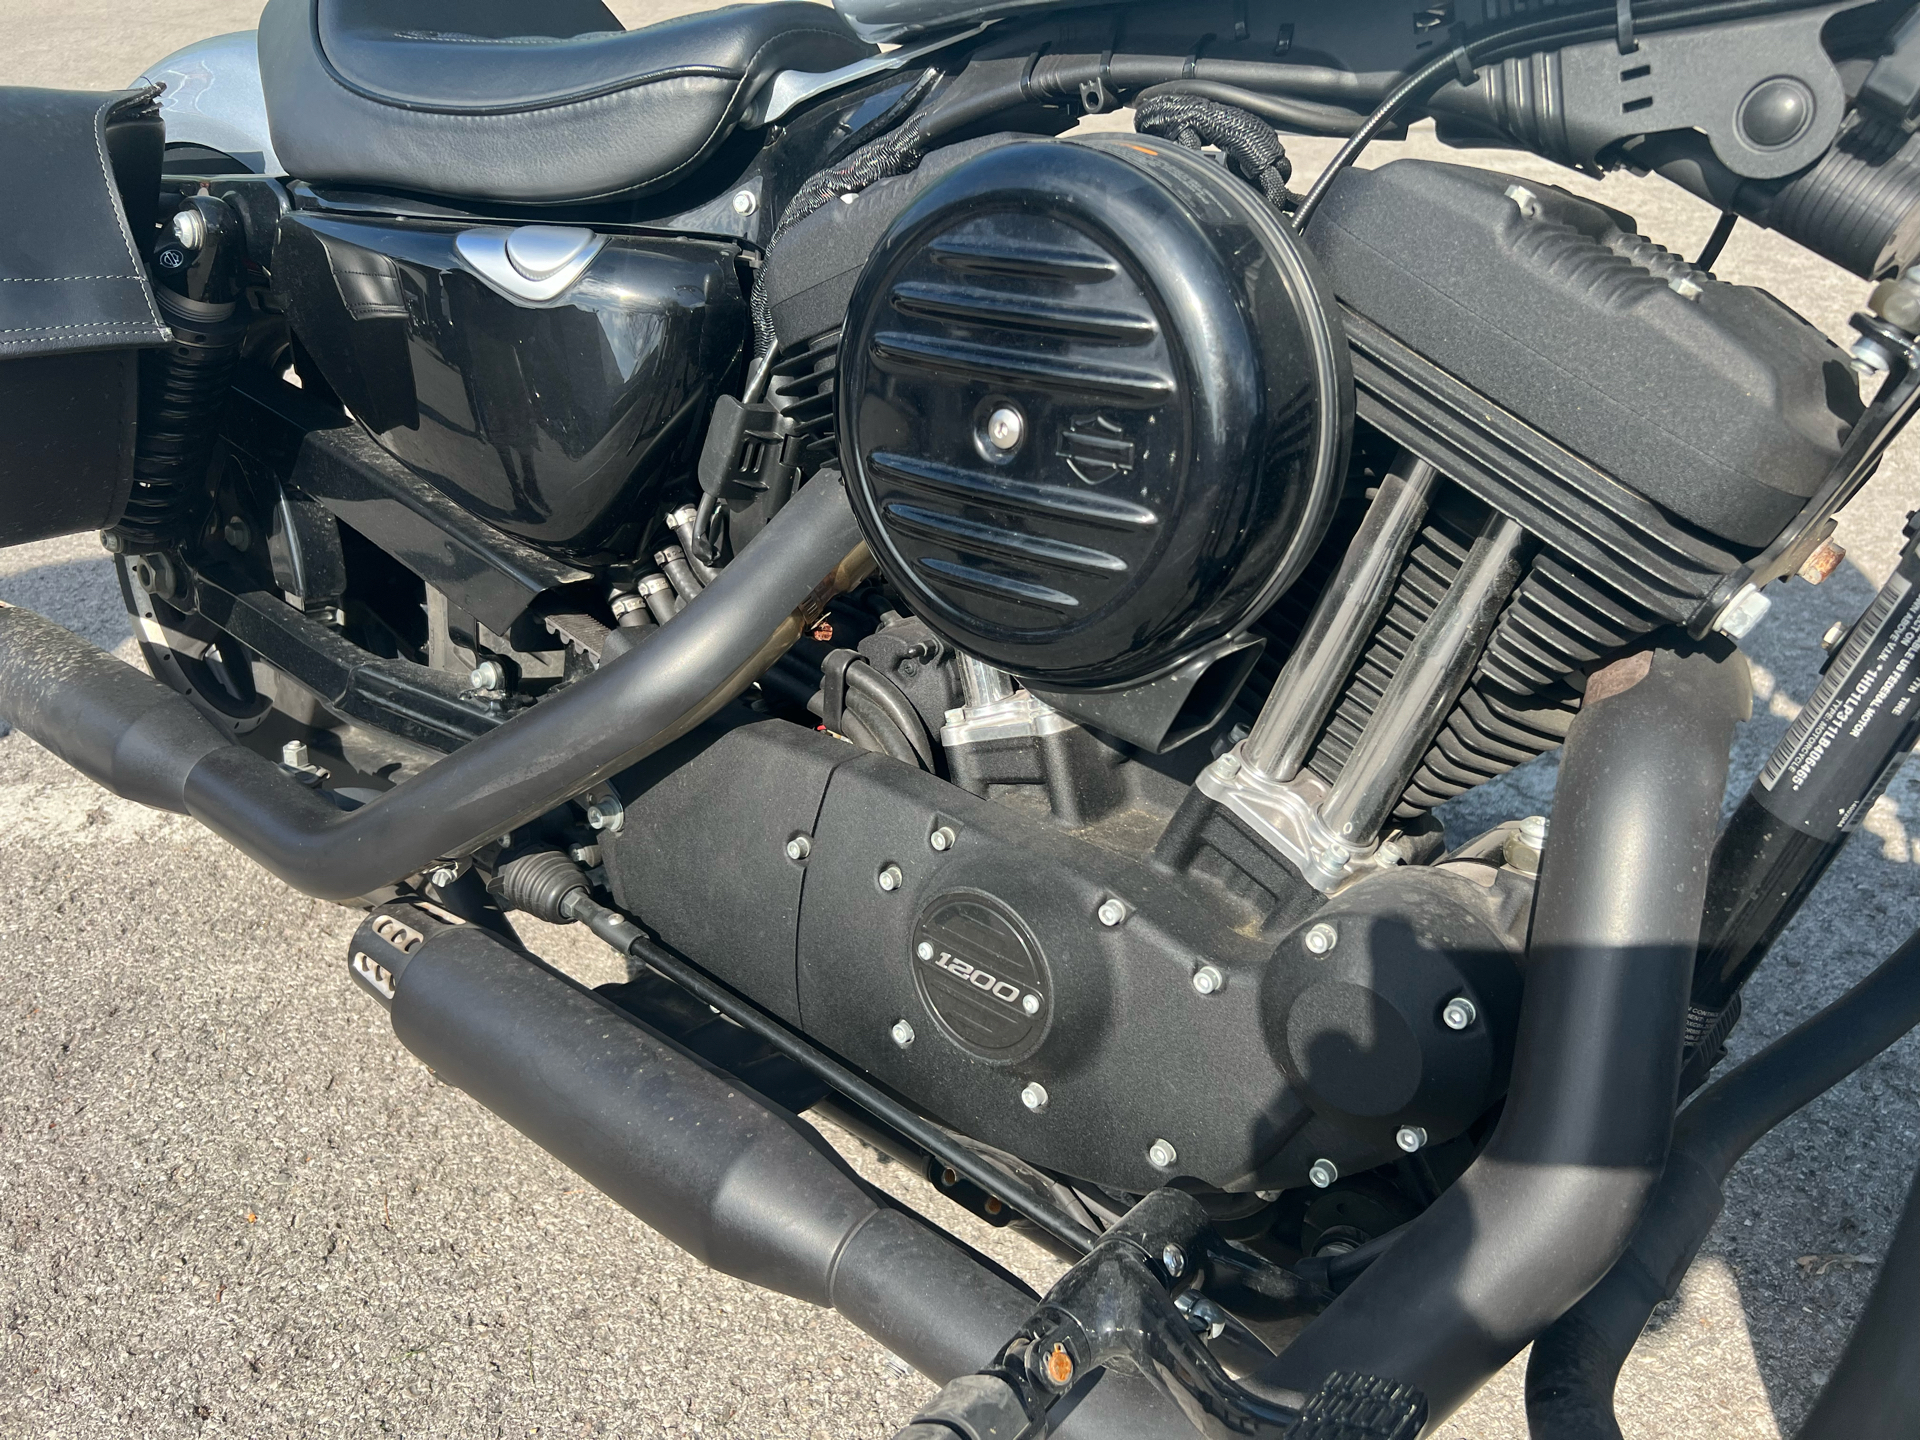 2020 Harley-Davidson Iron 1200™ in Franklin, Tennessee - Photo 3